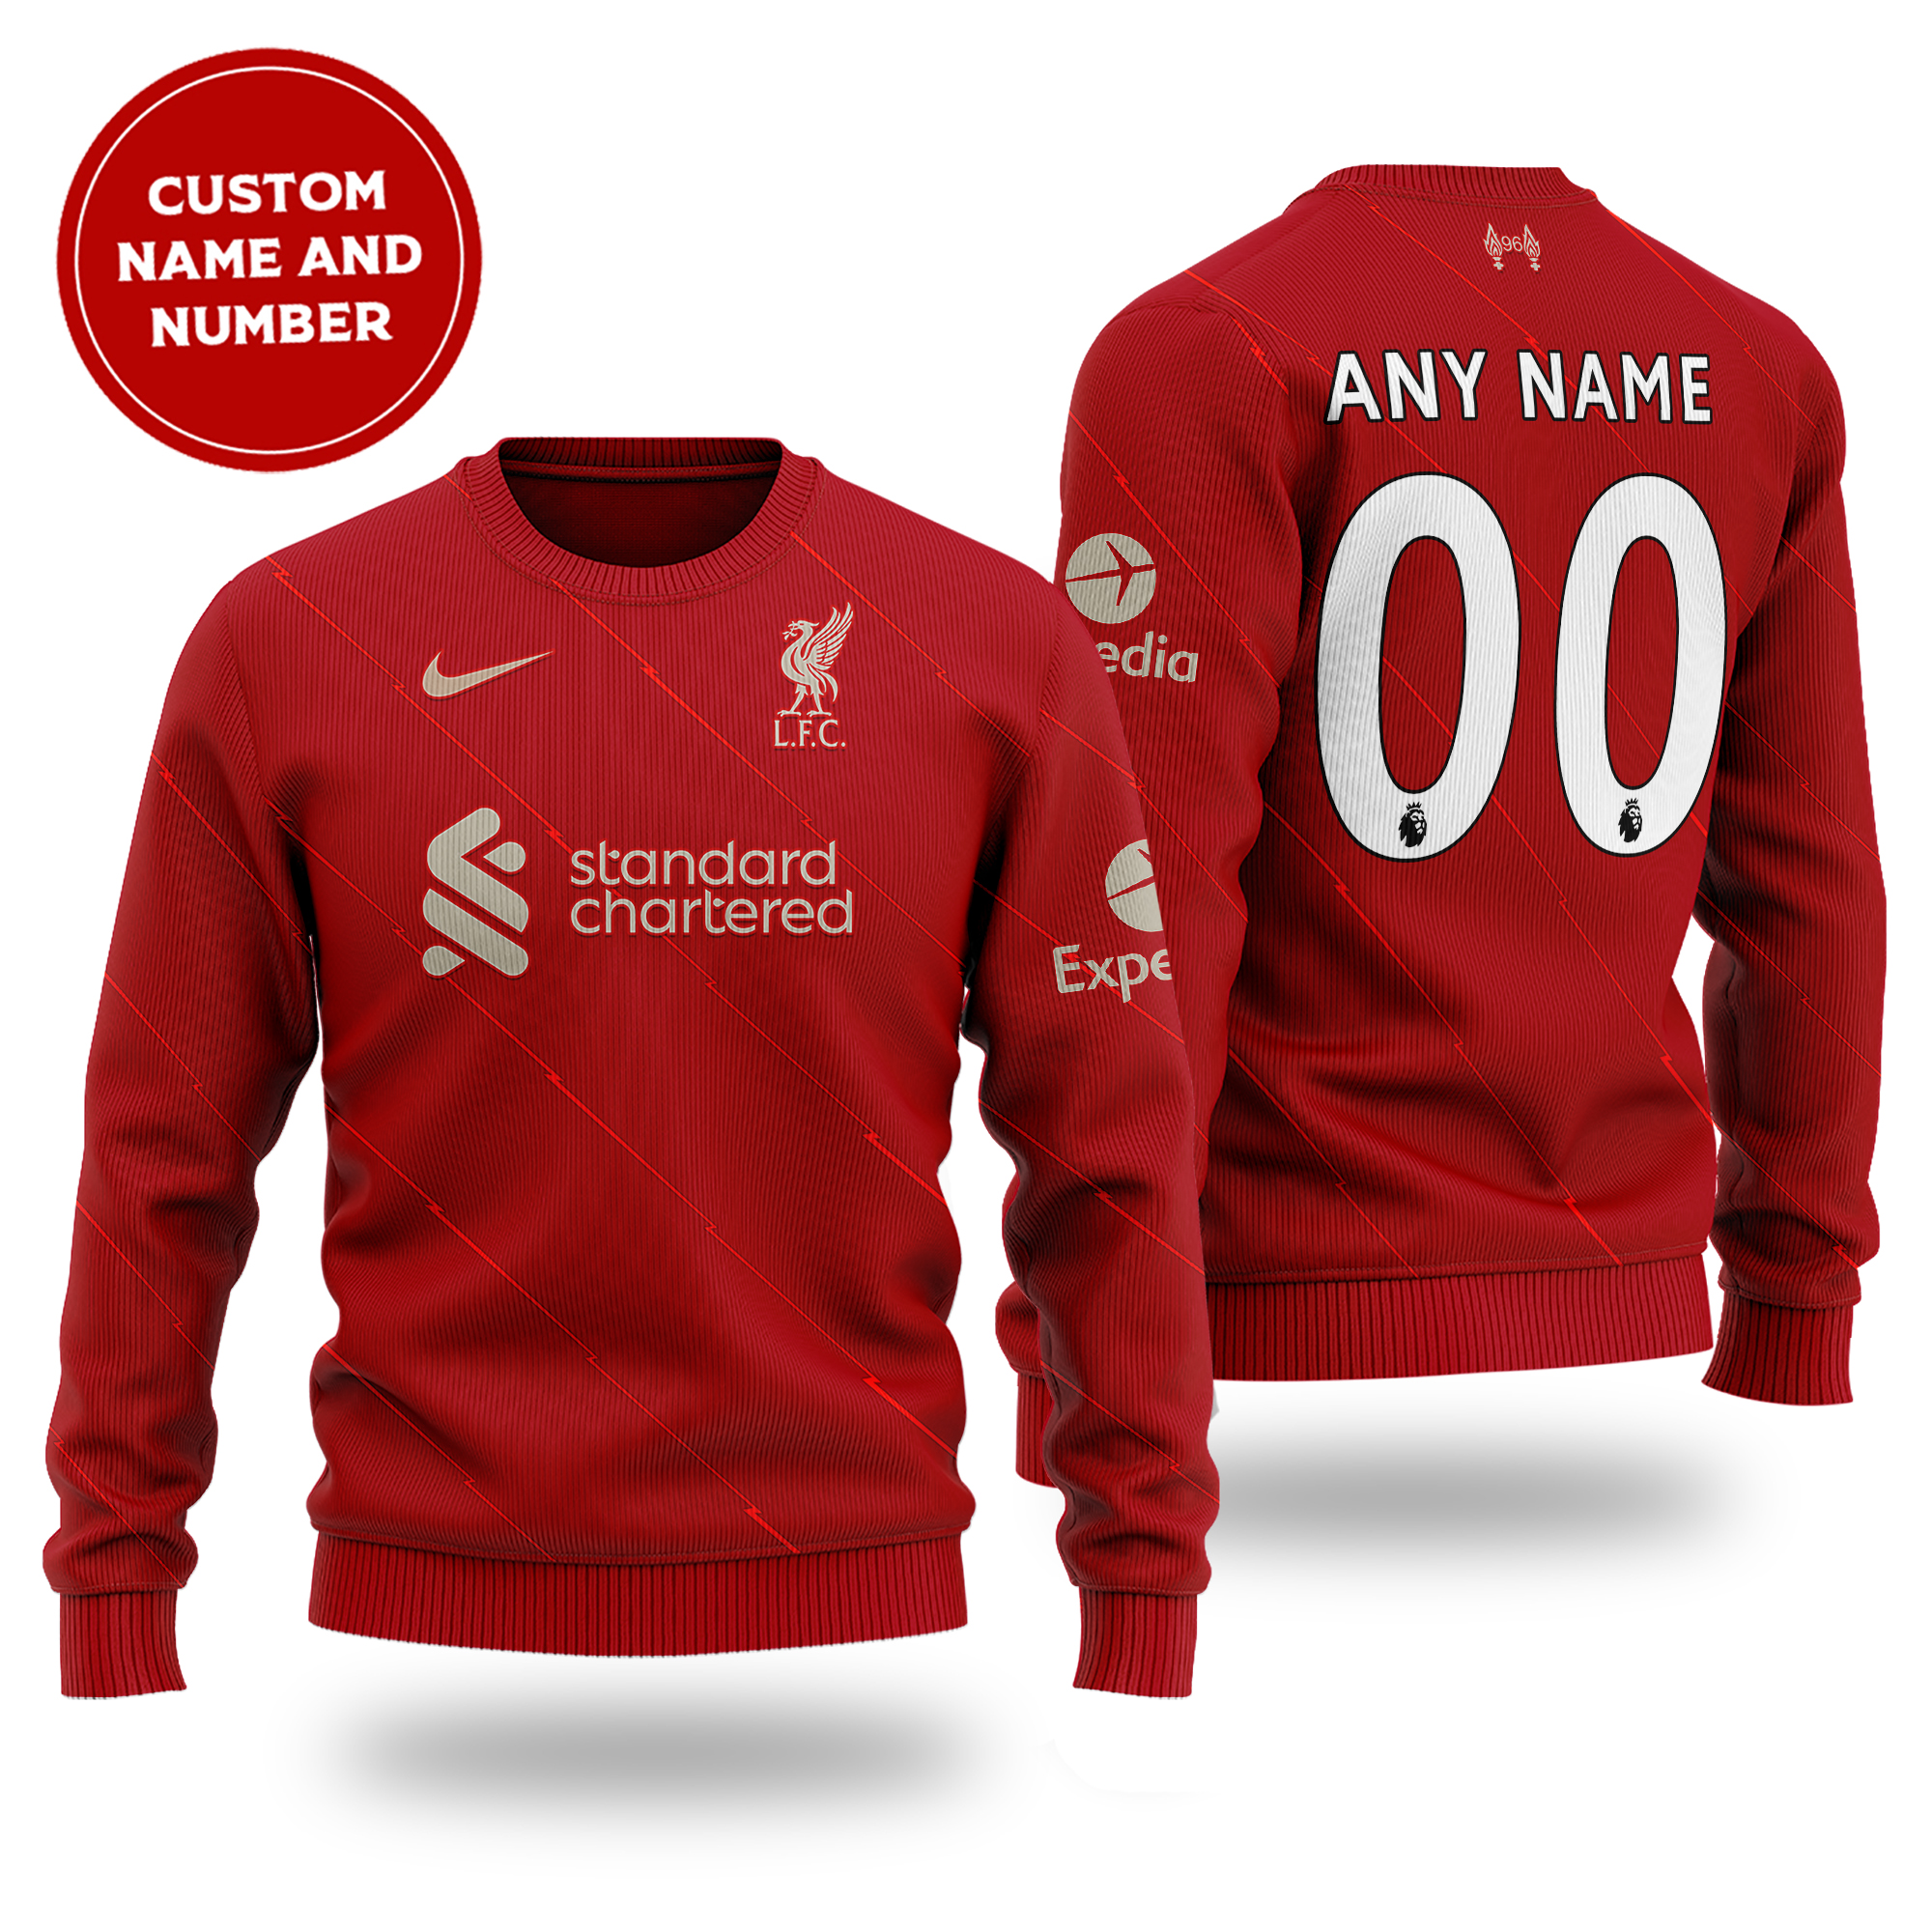 [ Amazing ] Primier League Liverpool FC cutom name and number sweater – Saleoff 261121